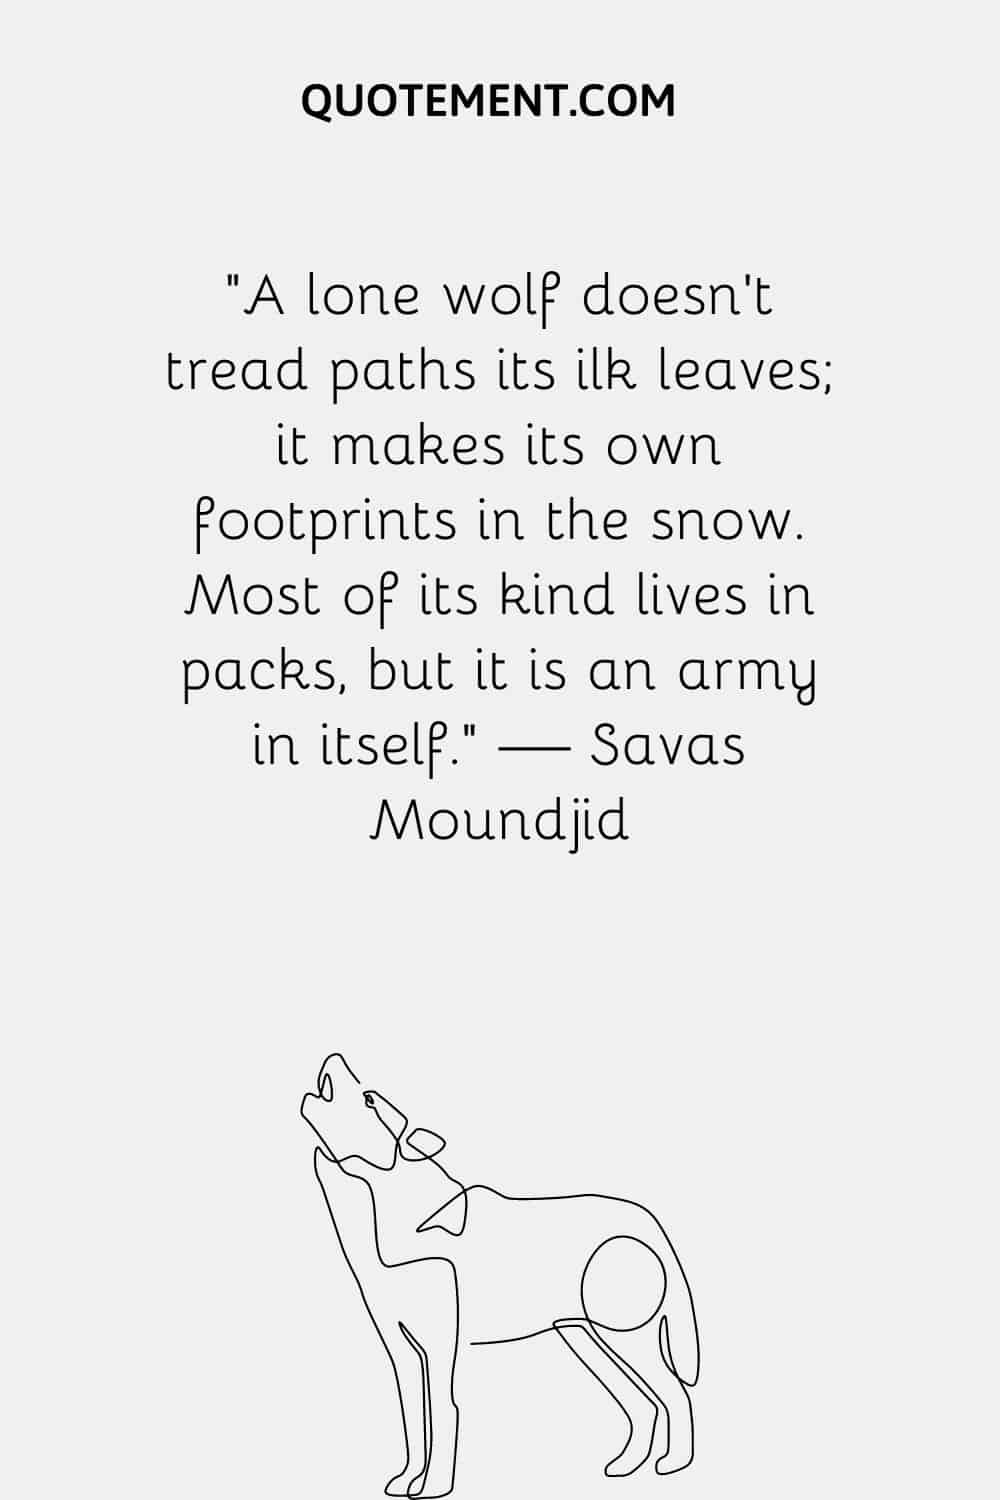 A lone wolf doesn’t tread paths its ilk leaves